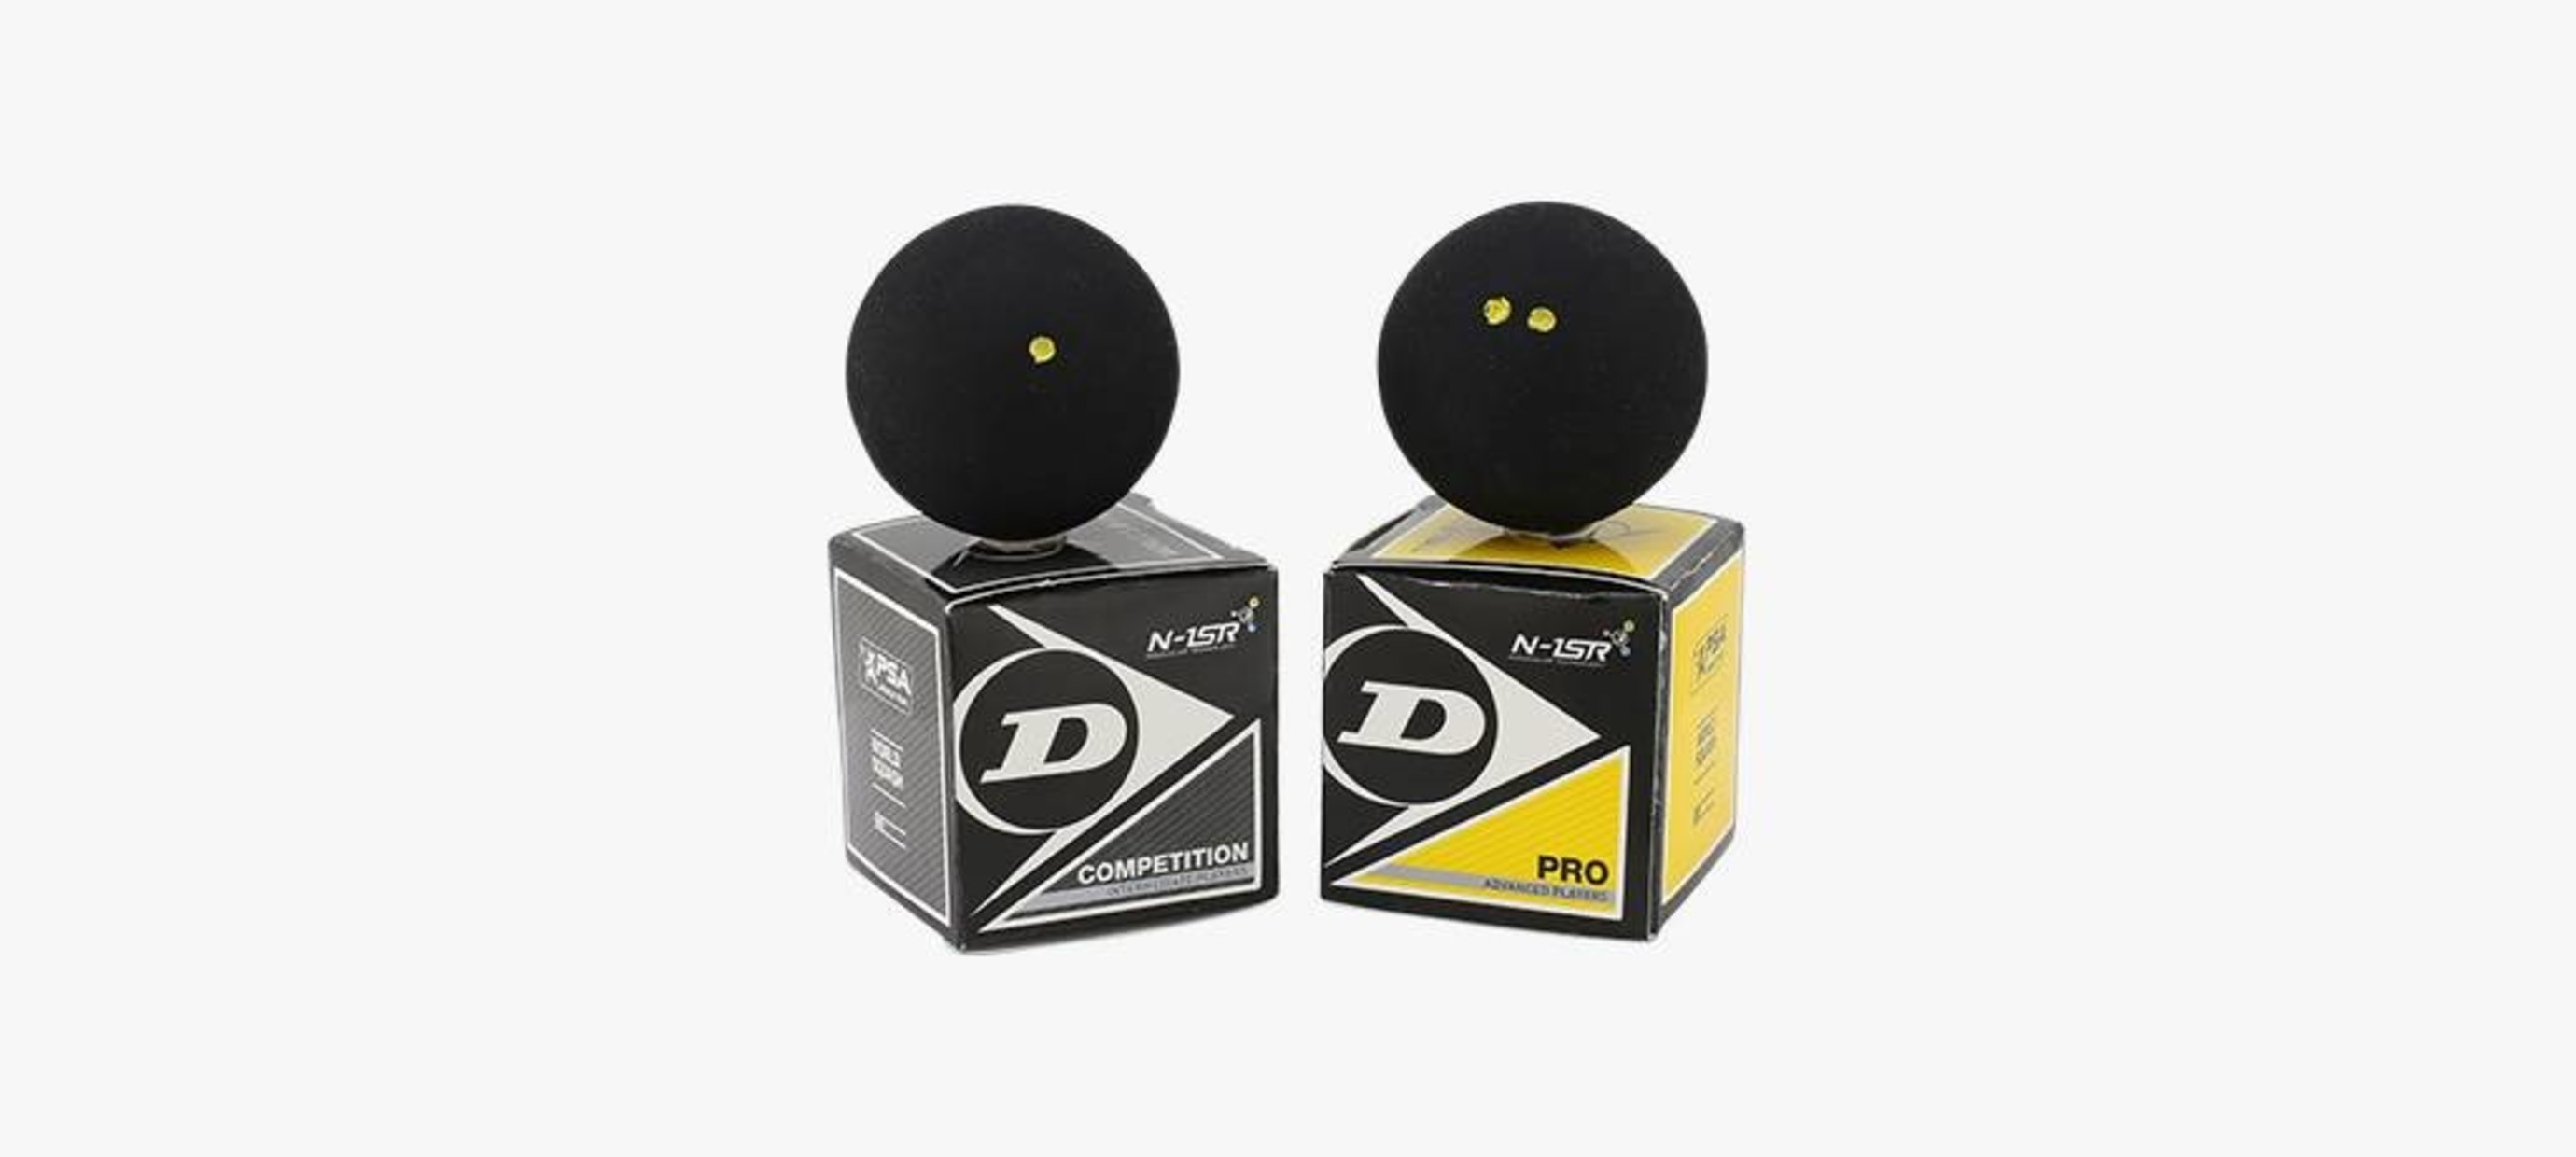 steekpenningen Vergevingsgezind Mangel The difference between the Dunlop Pro and the Dunlop Competion Squash balls  - Squashpoint